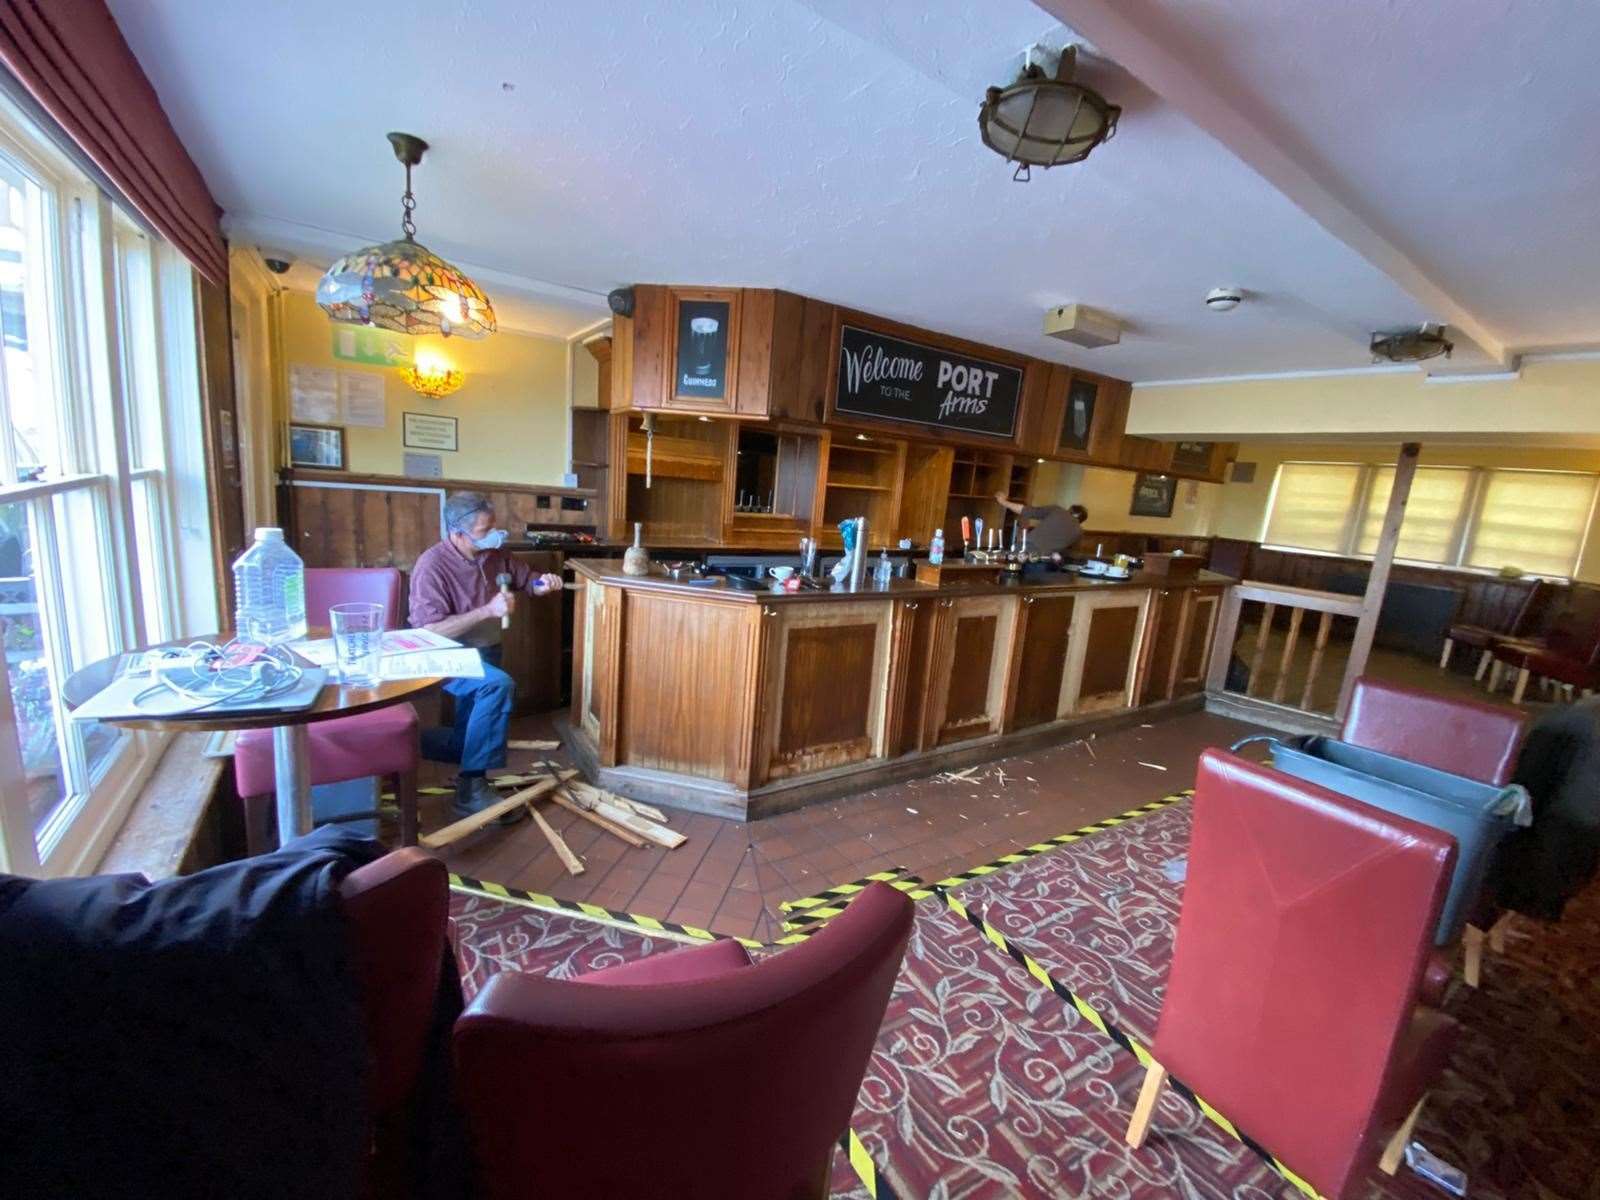 The old carpet inside the Port Arms has been pulled up and the bar is being modified